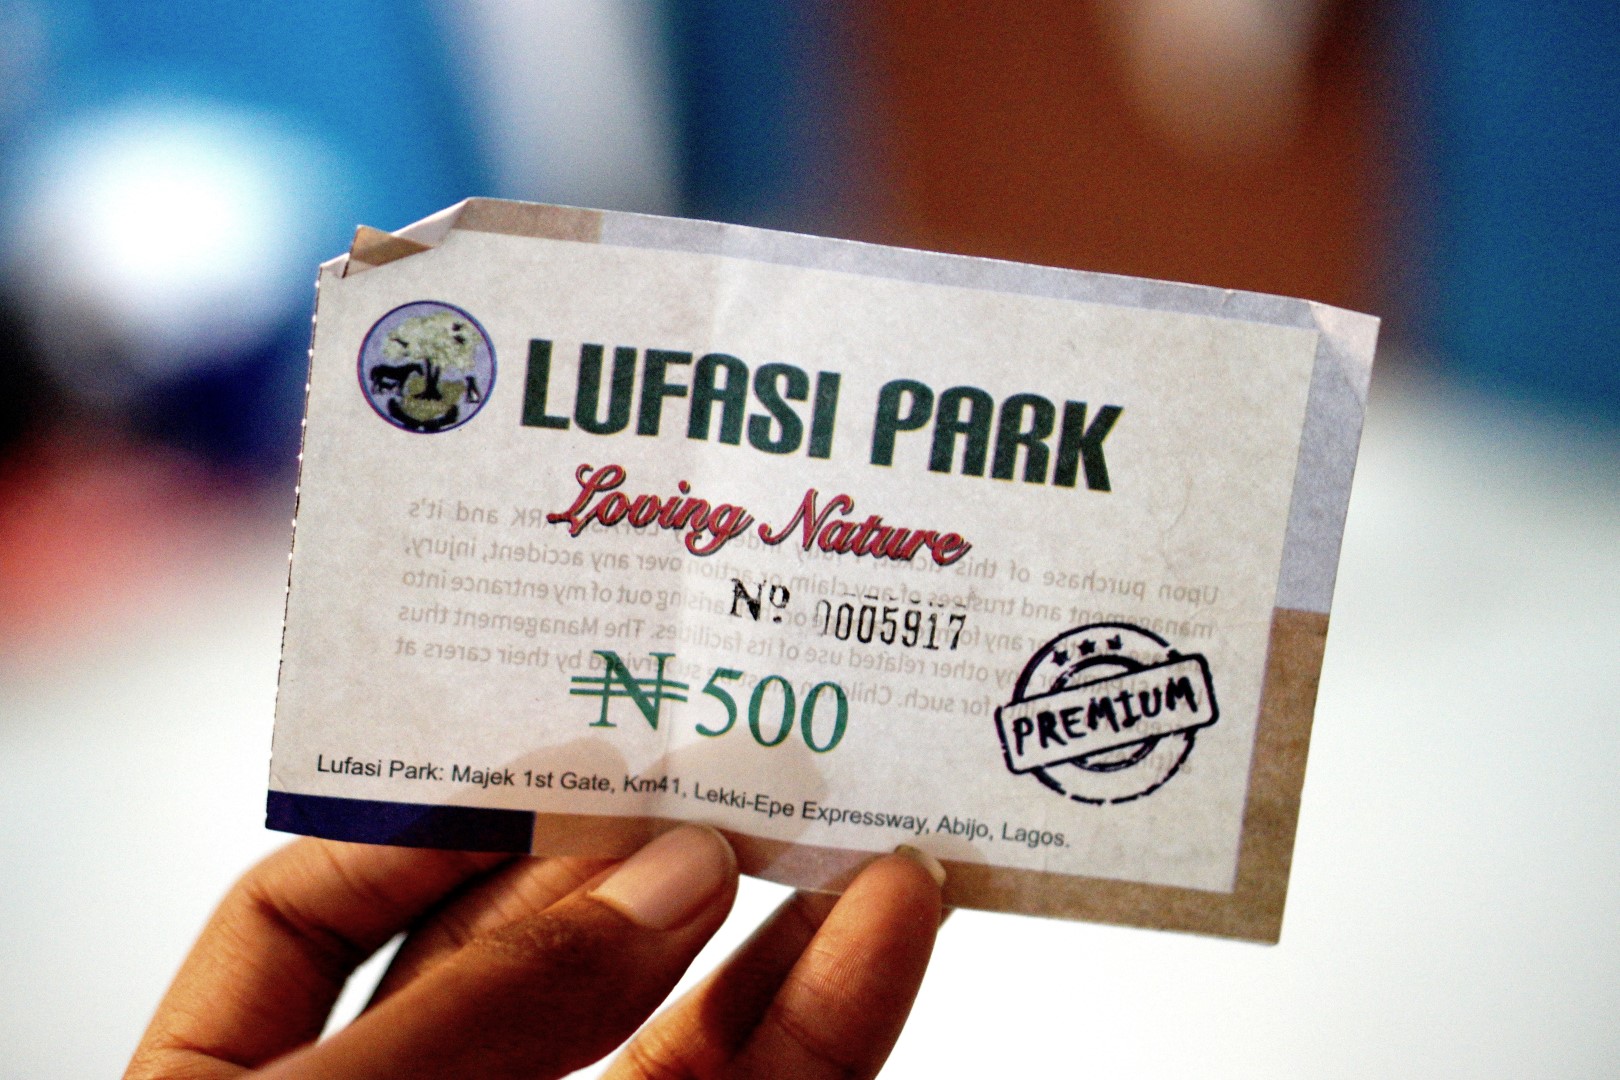 Entrance fee ticket to the lufasi nature park in lagos